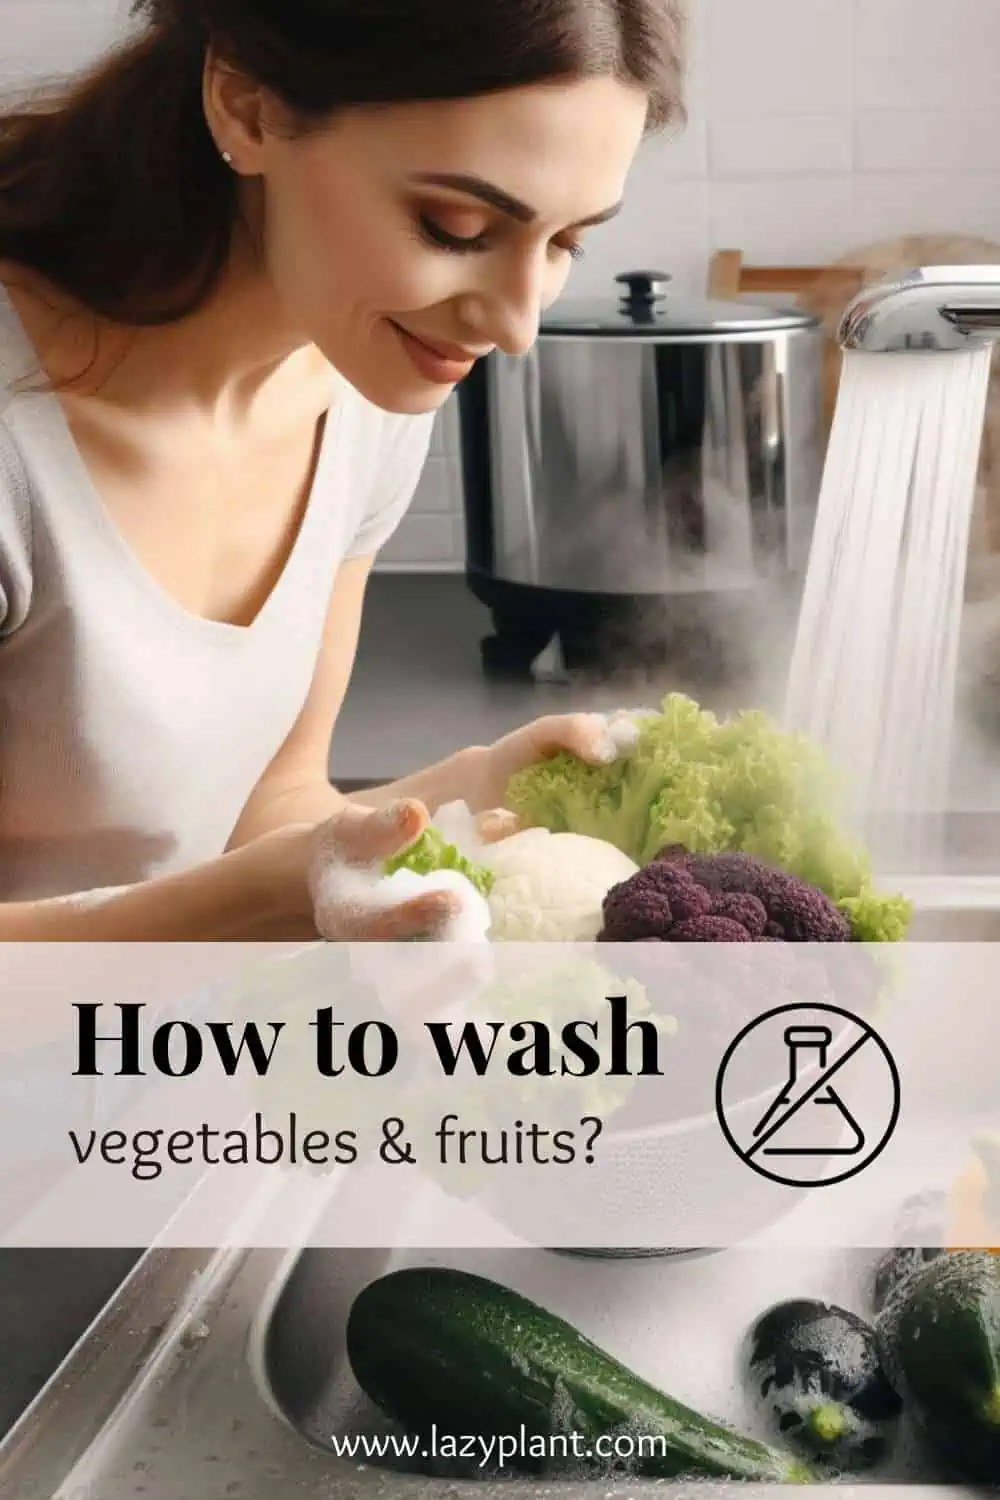 How to use vegetables & fruits without chemicals?